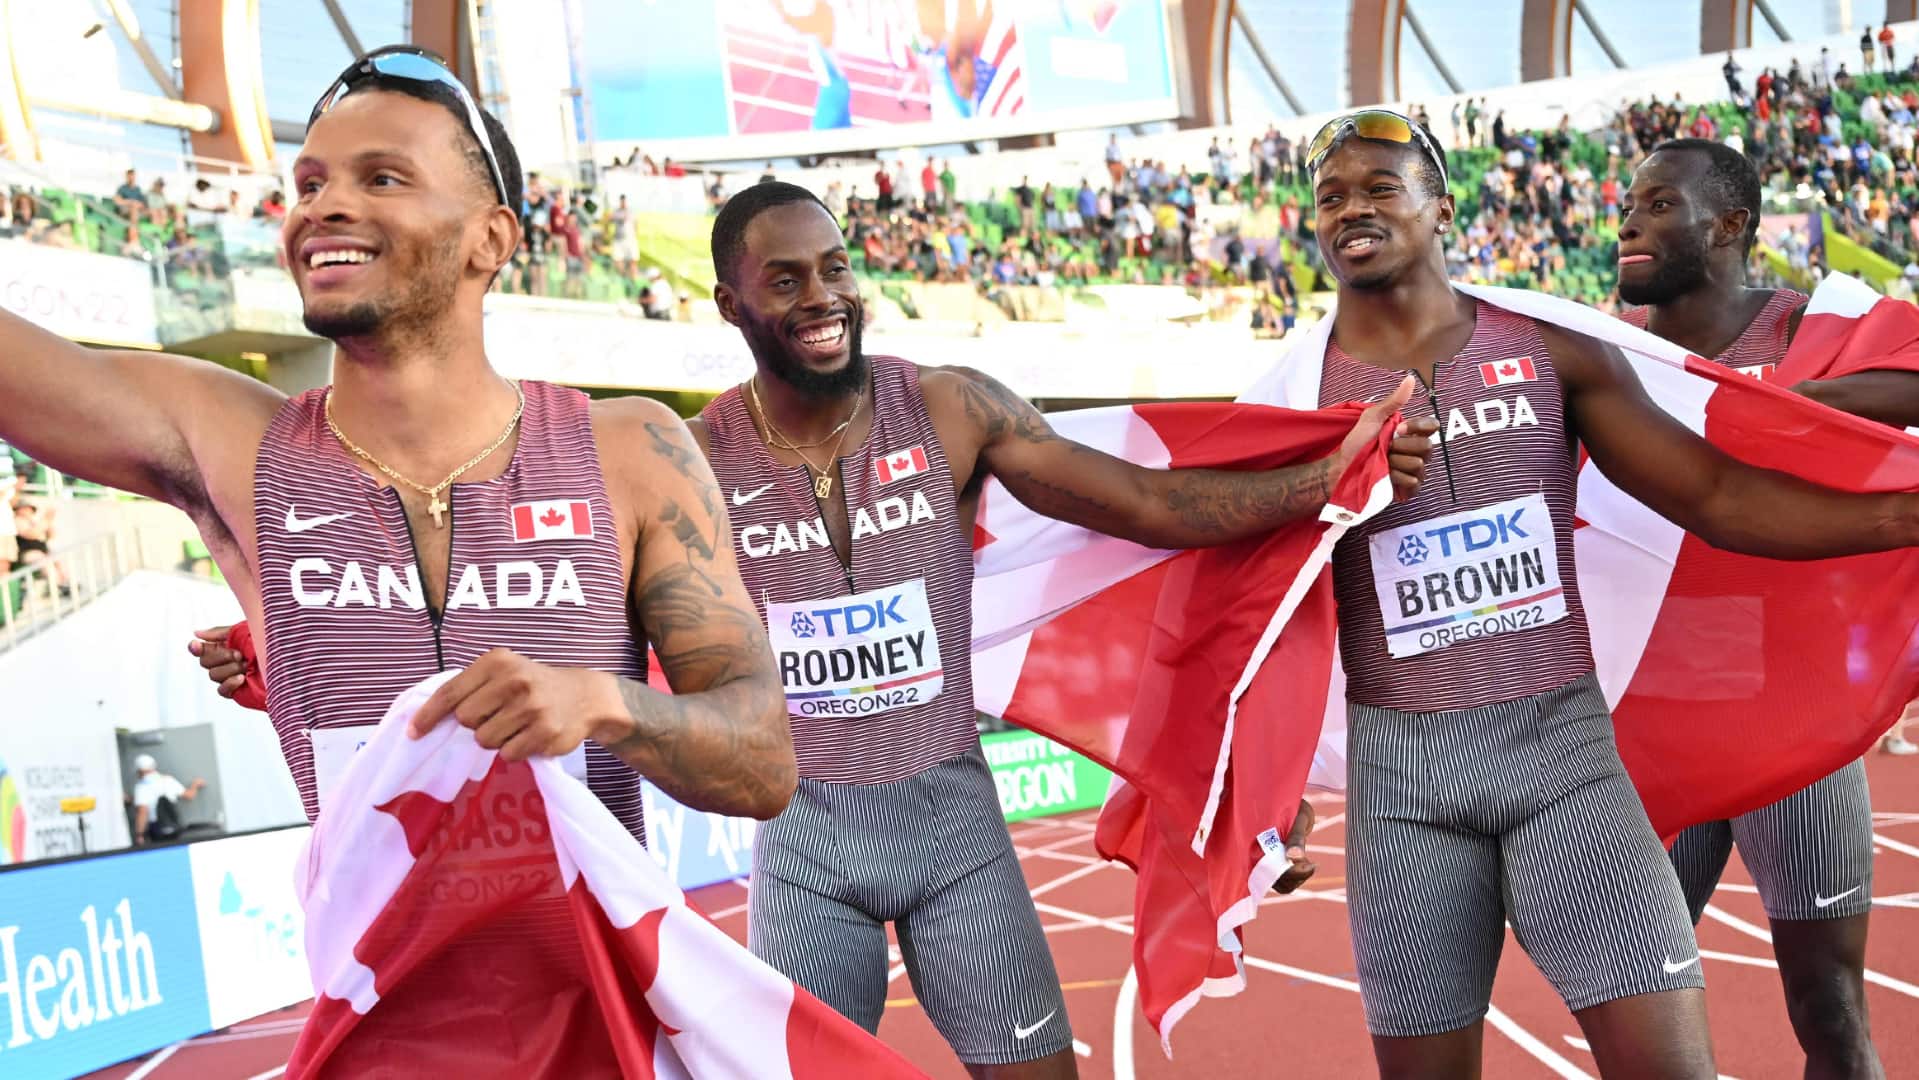 canada wins gold in mens 4x100m relay at world athletics championships